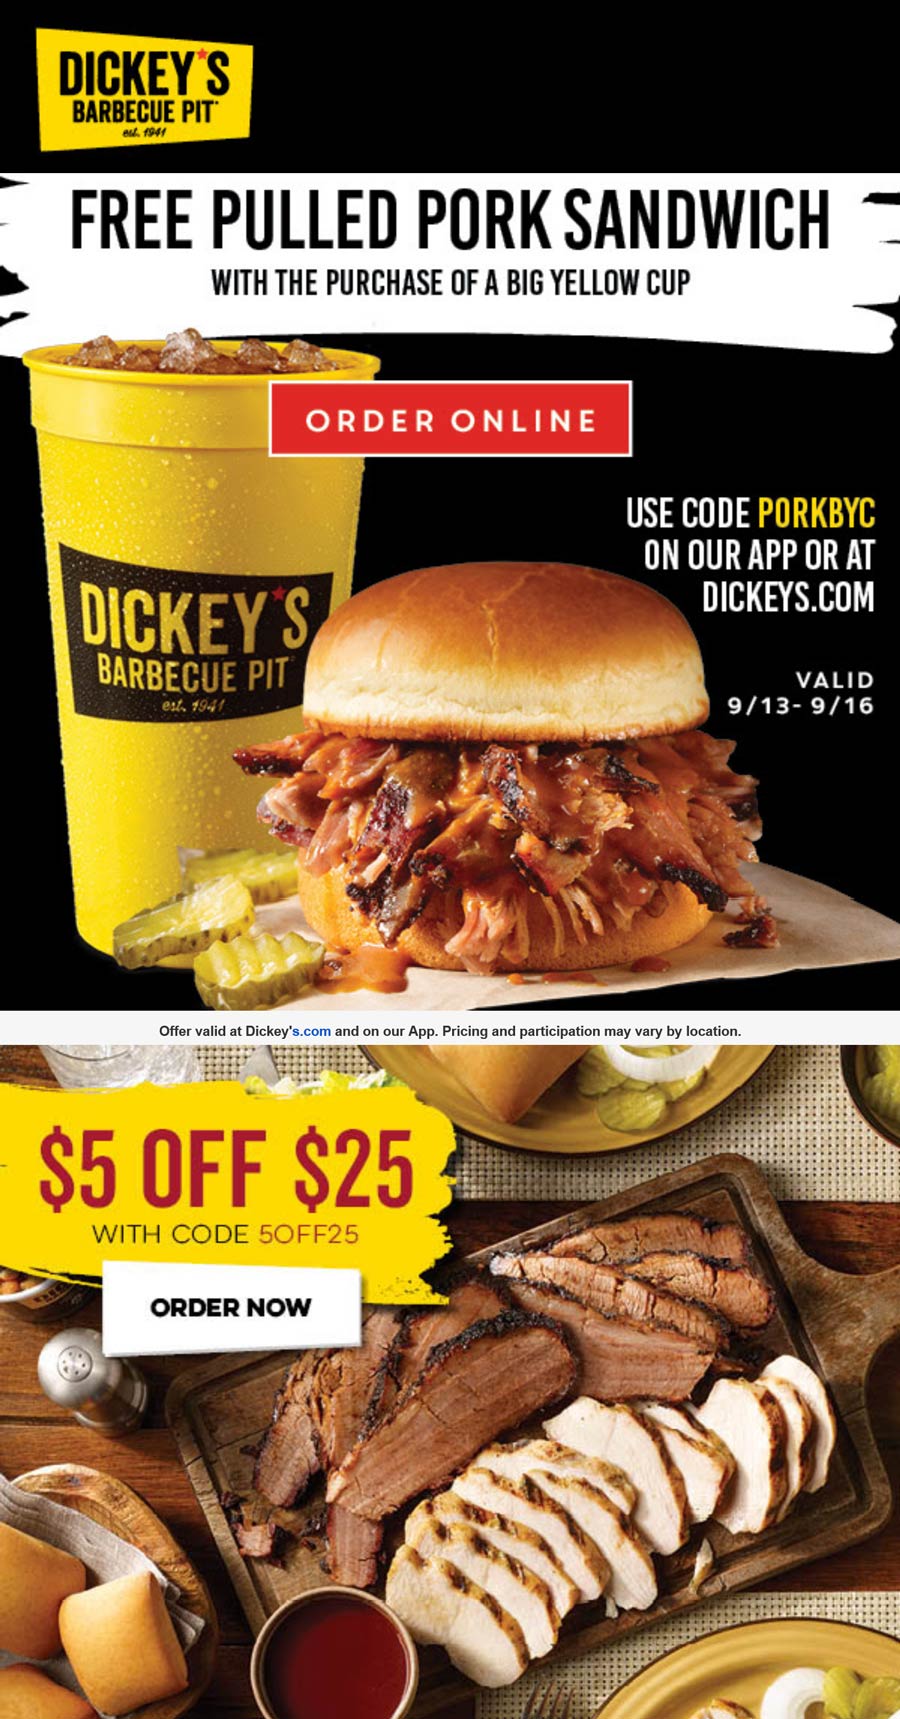 Free pulled pork sandwich with your yellow cup & more today at Dickeys